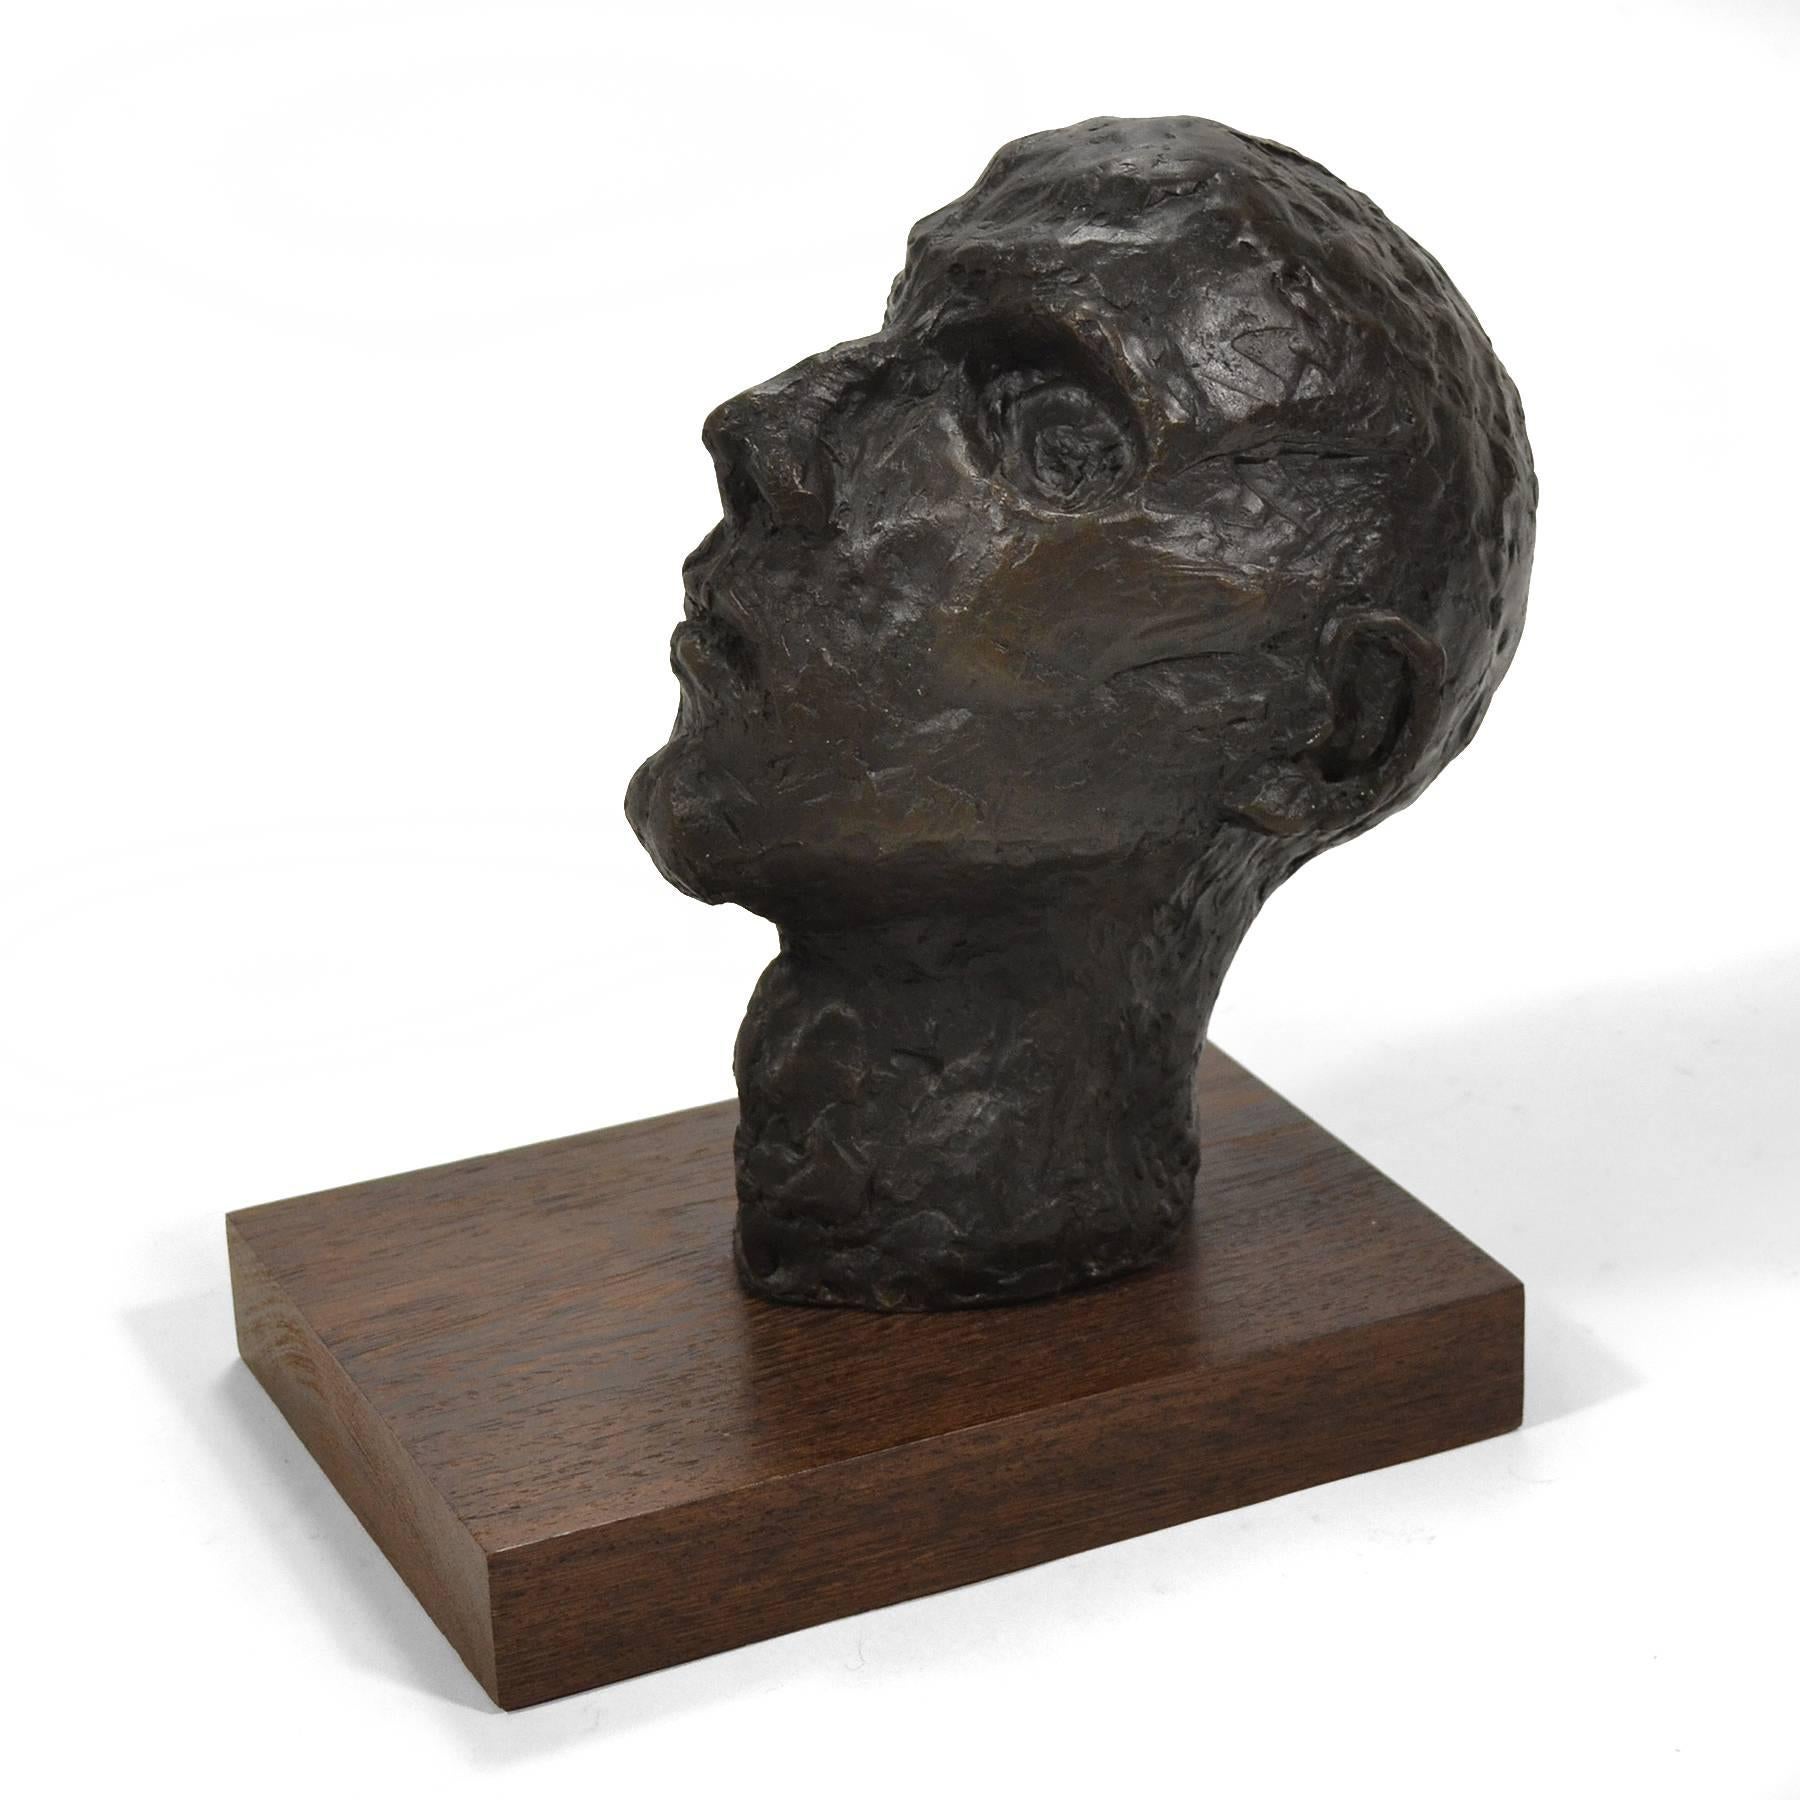 An evocative and powerful piece, this sculpture of a man’s head is cast in solid bronze so it has substantial heft. It has terrific presence and can appear in turns both tranquil and haunting, it reminds us a bit of works by Giacometti. It is